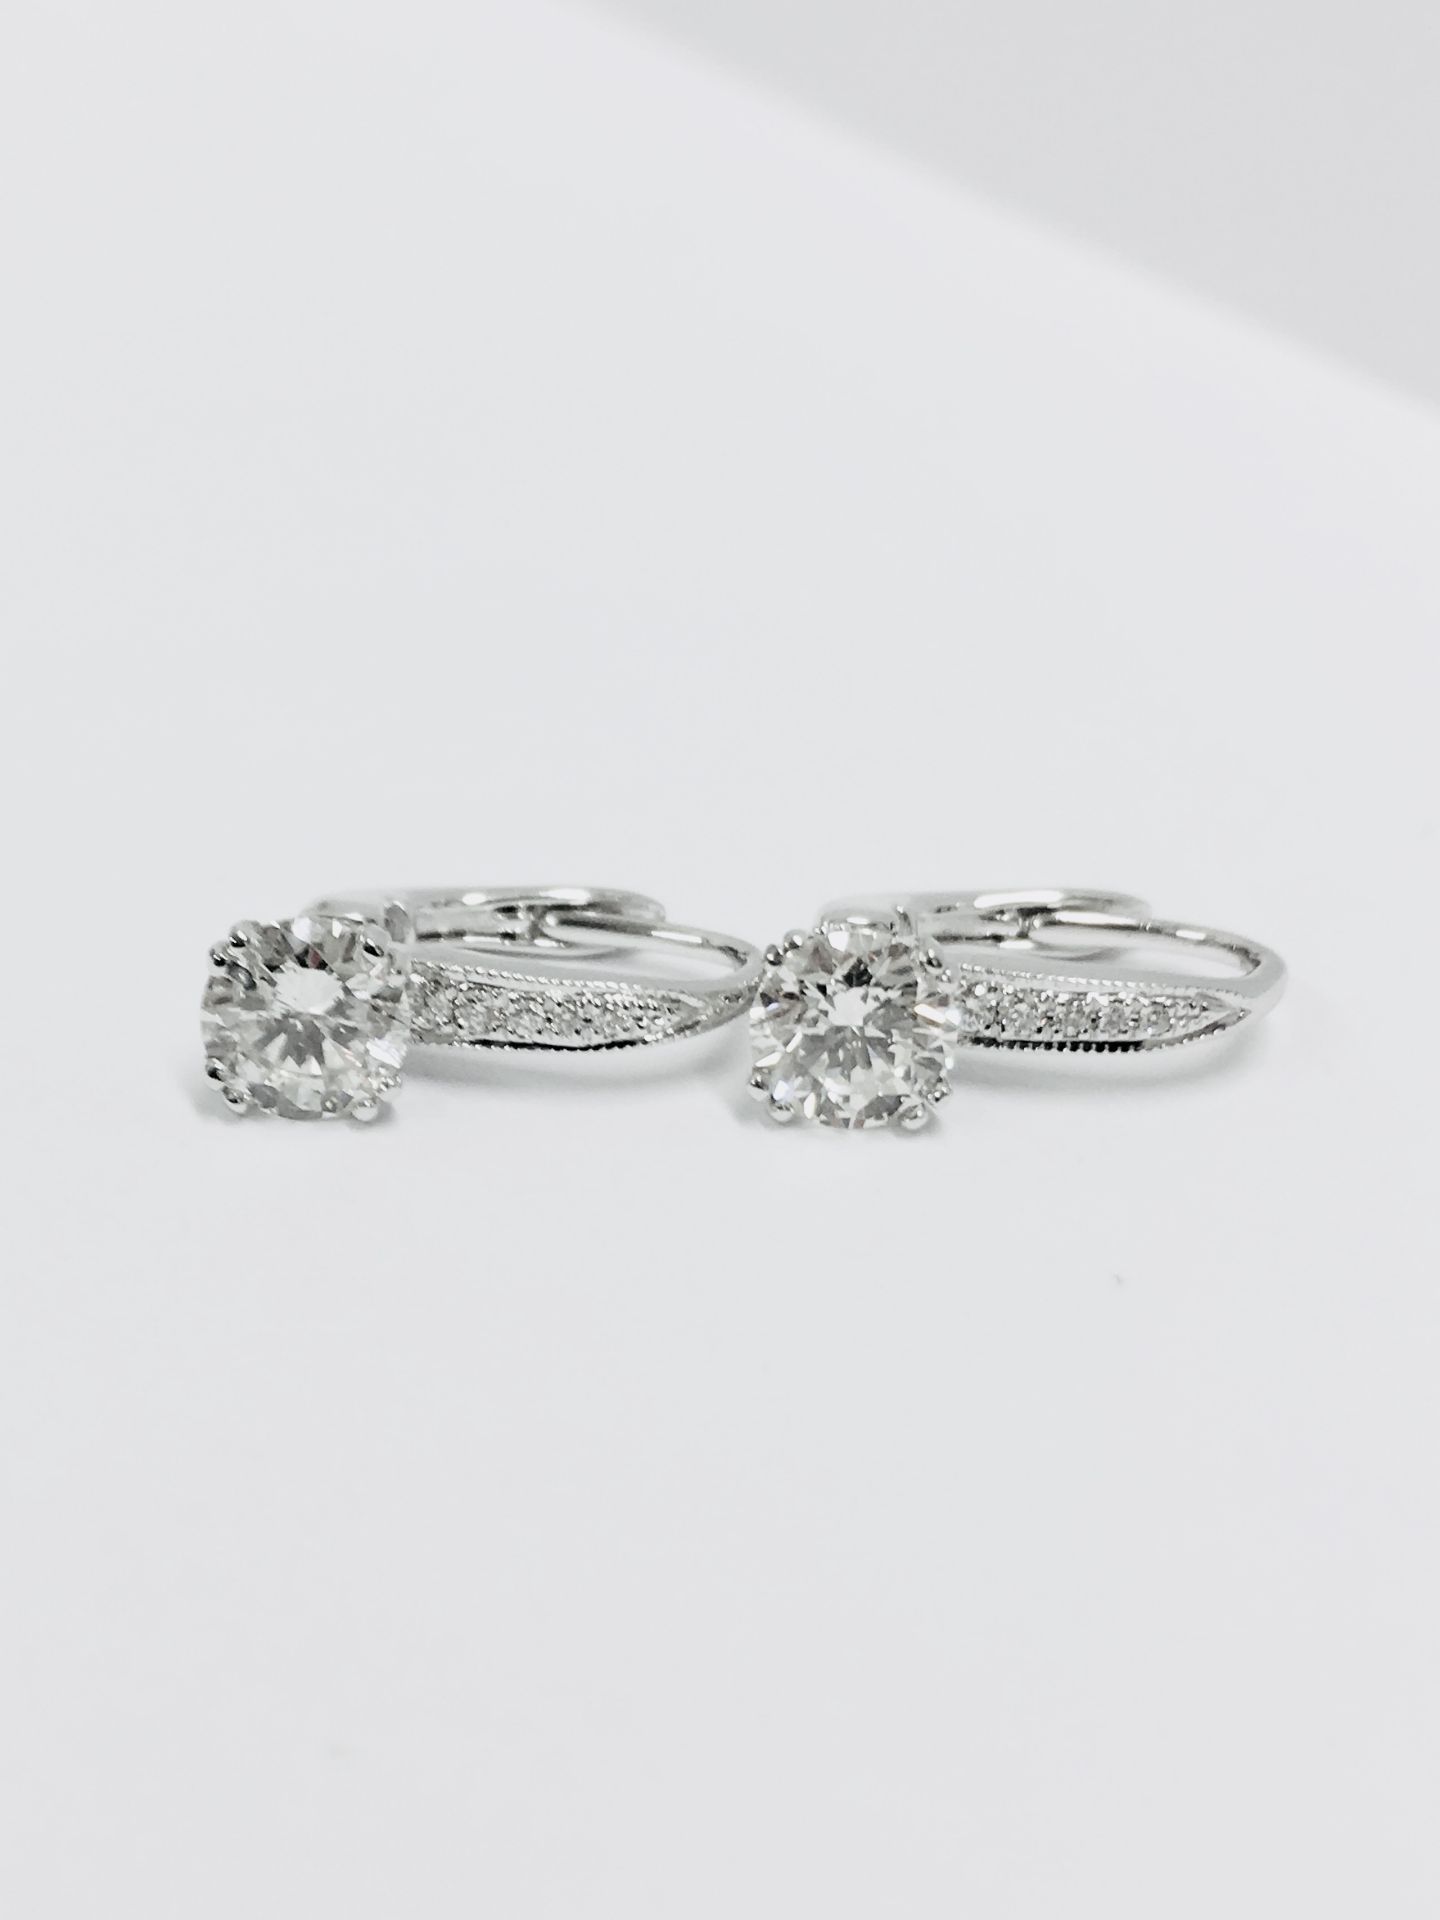 18Ct White Gold Hoop Style Earrings With Hinge Fastners. - Image 3 of 22